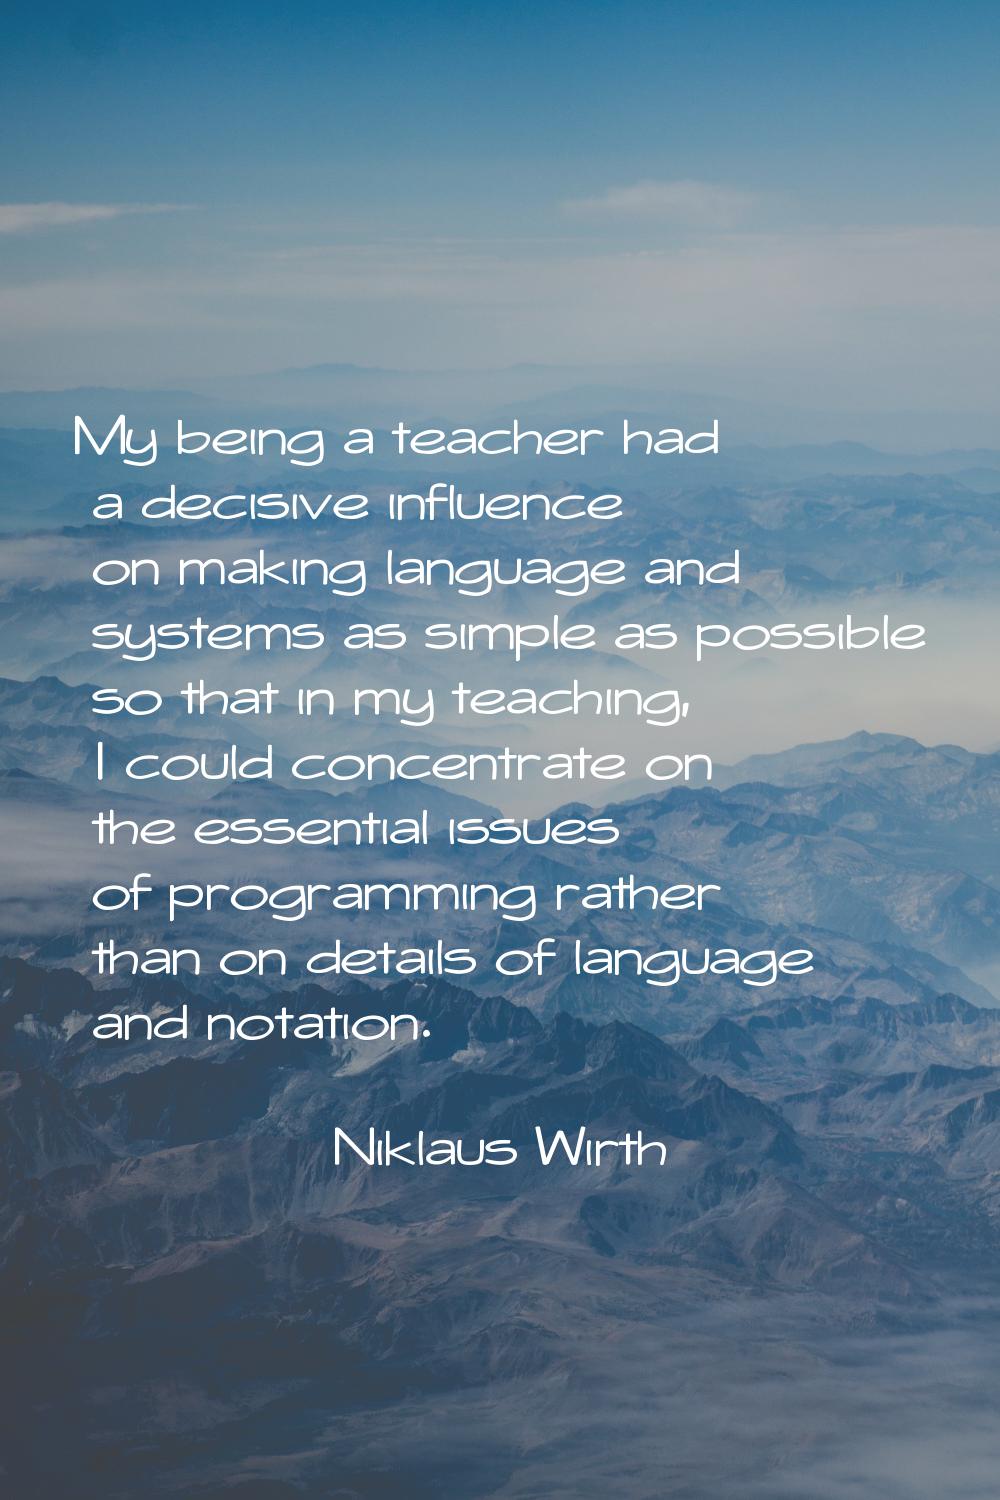 My being a teacher had a decisive influence on making language and systems as simple as possible so